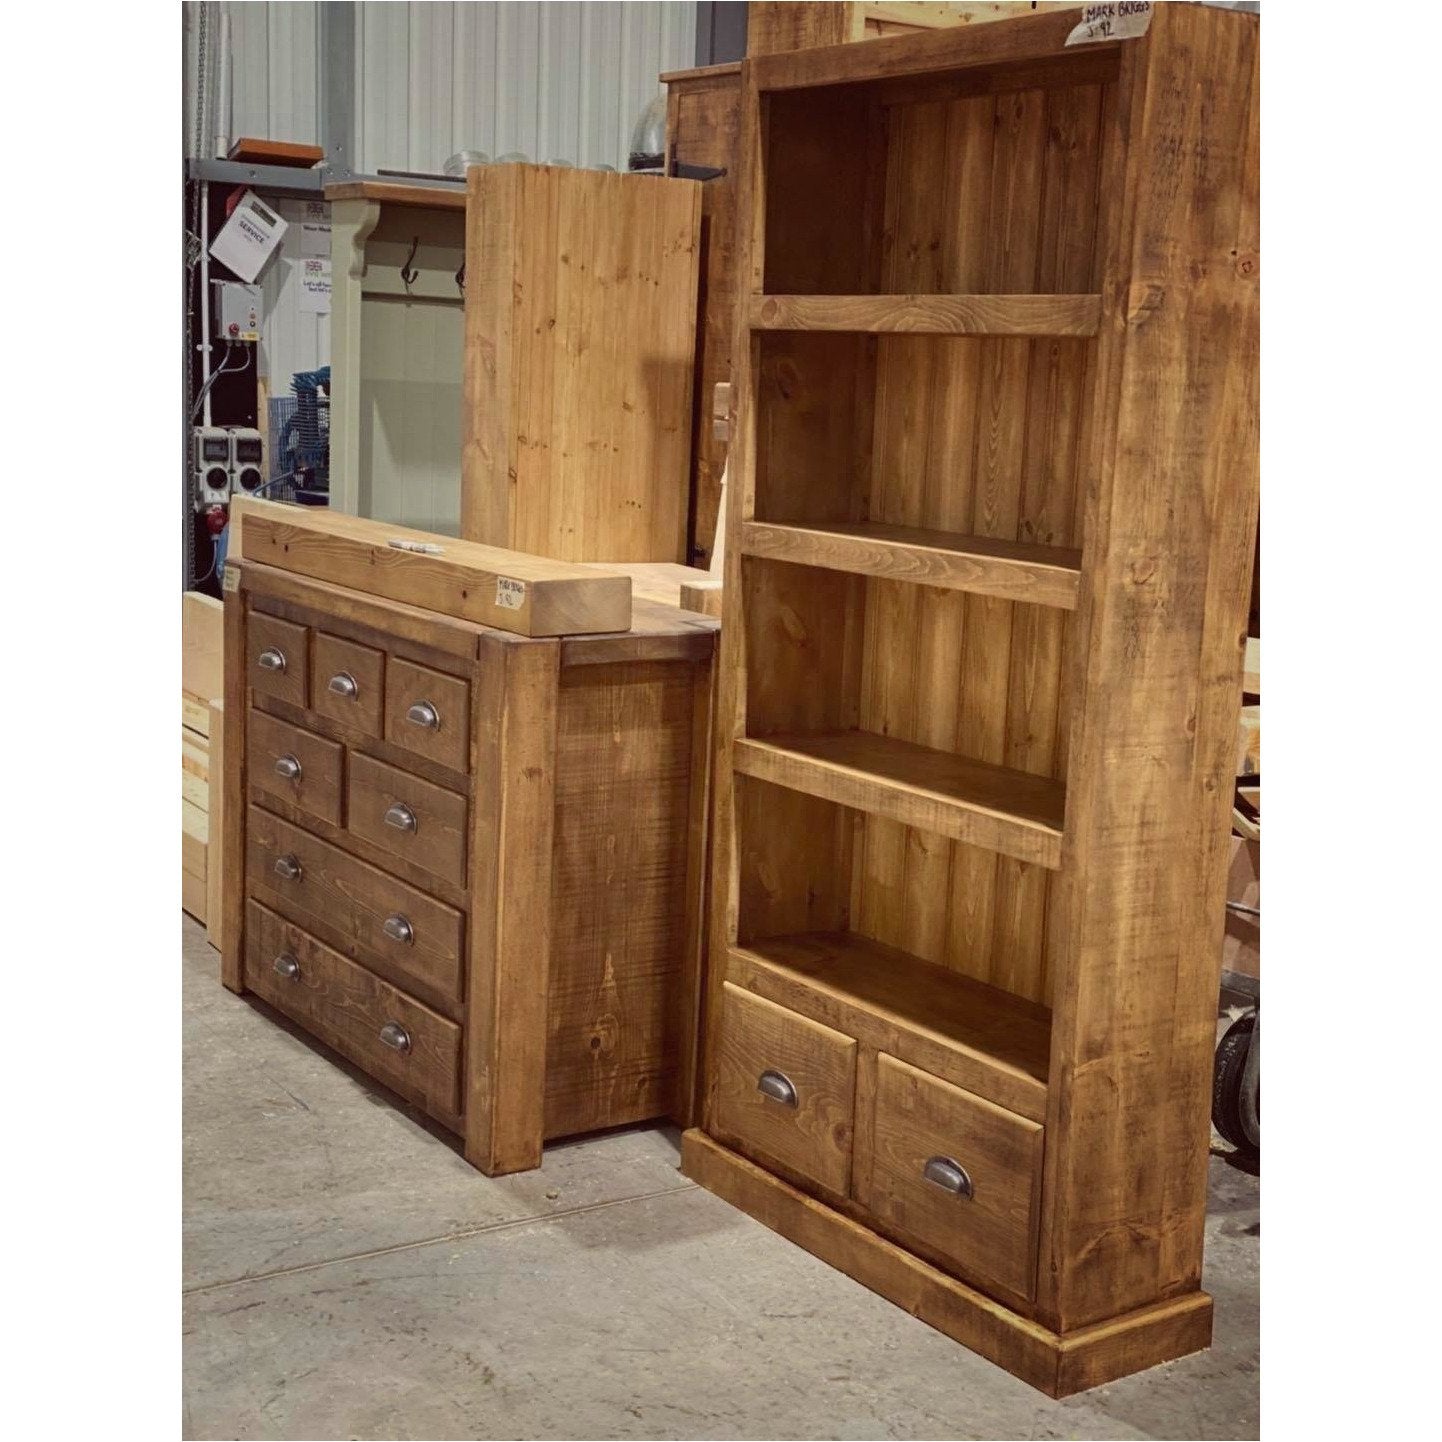 Kensington Rustic Solid wood Bookcase with handy drawers. - Live With Wood